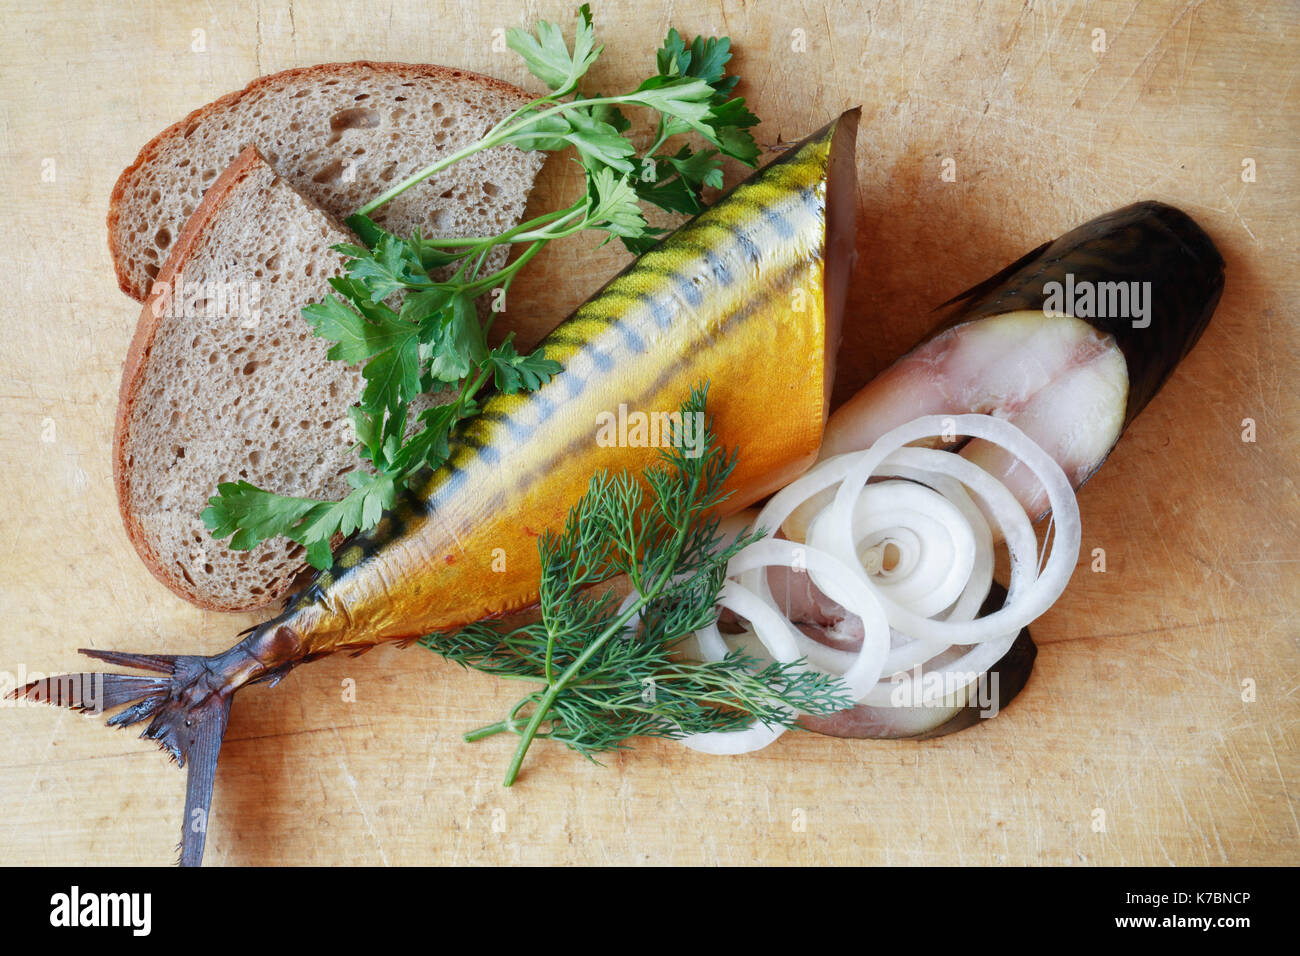 Sliced bloated fish and bread on wooden surface Stock Photo